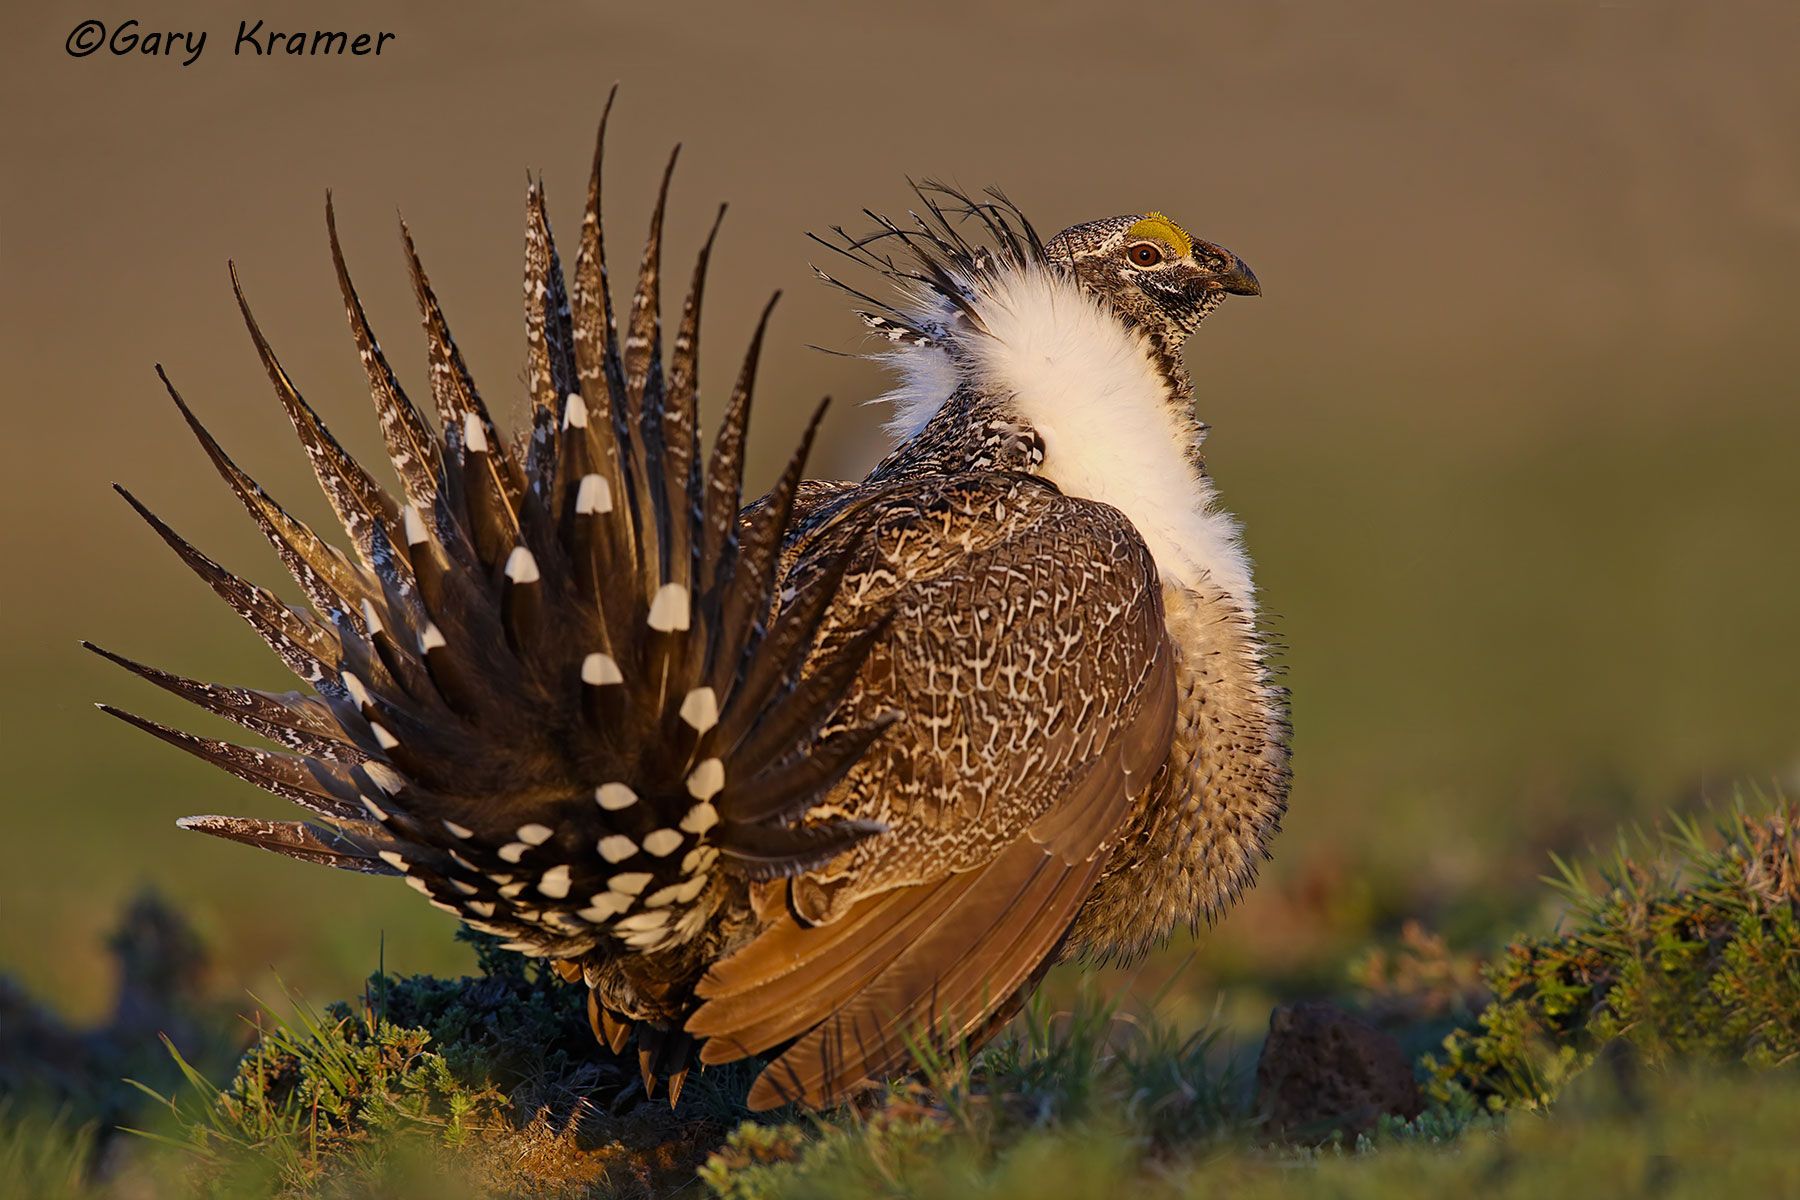 Greater Sage Grouse (Centrocercus urophasianus) - NBGGs#1727d